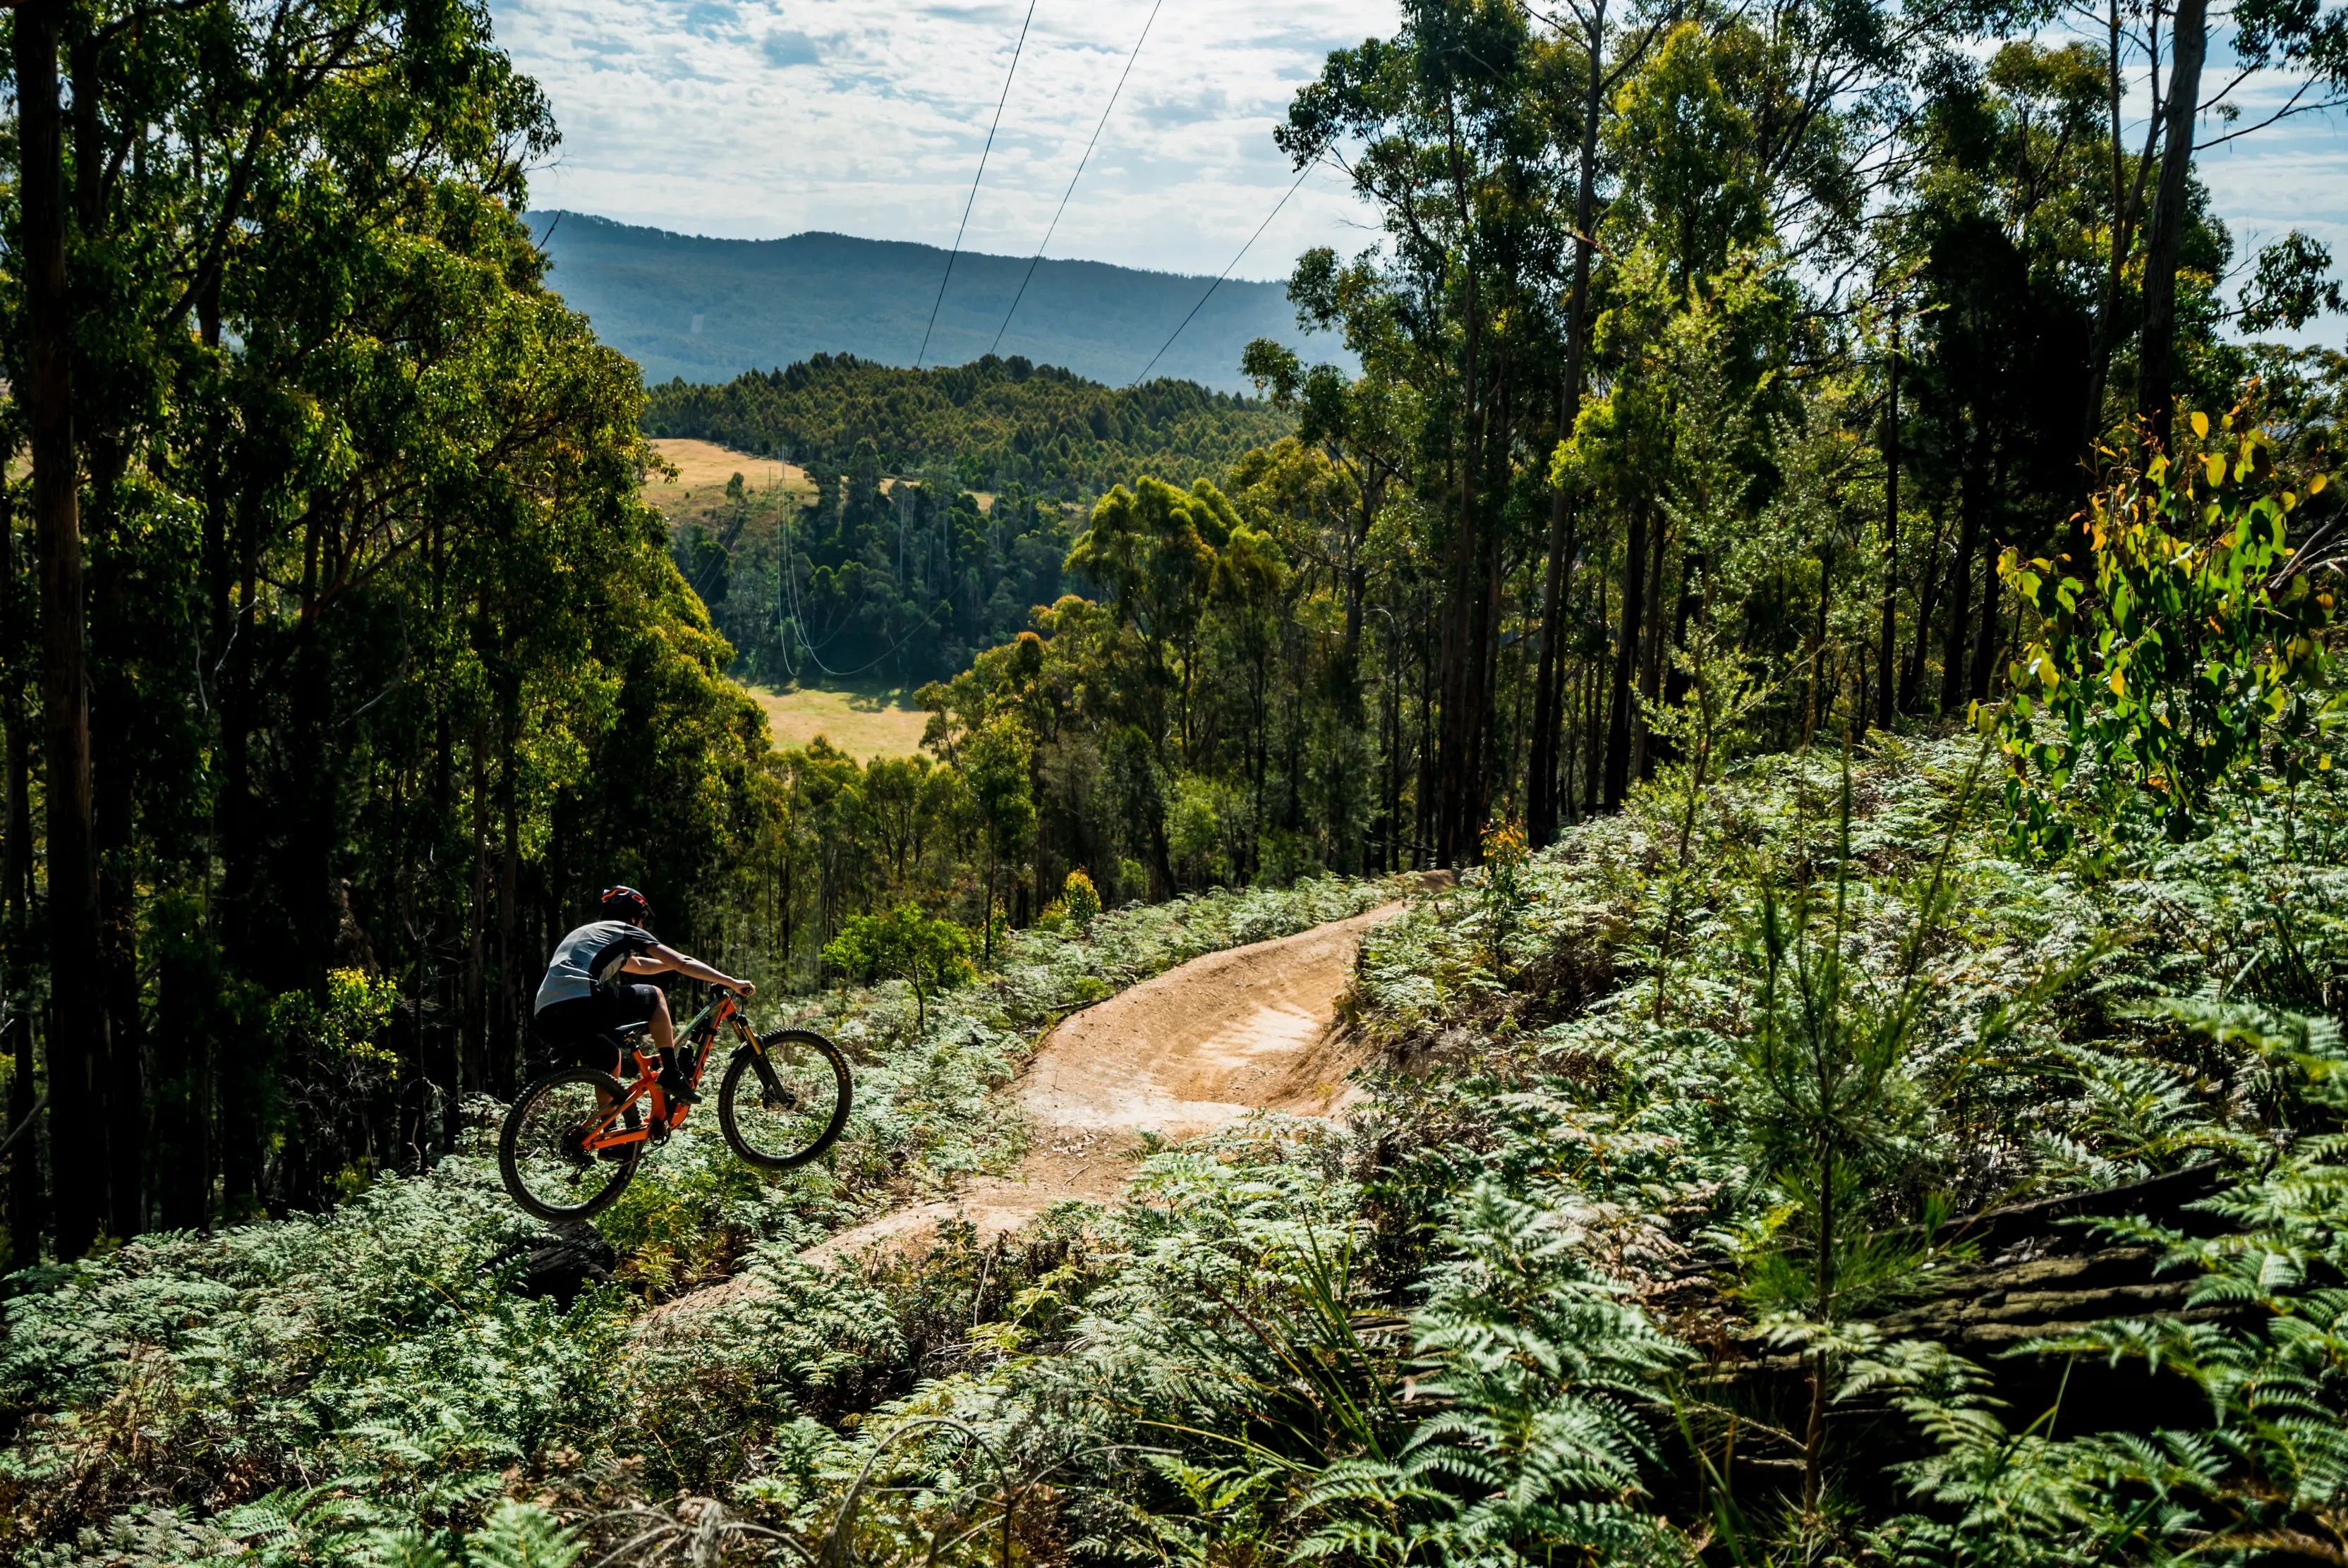 Landscape image of Wild Mersey Mountain Bike Trails, a cyclist is in the air in the foreground.